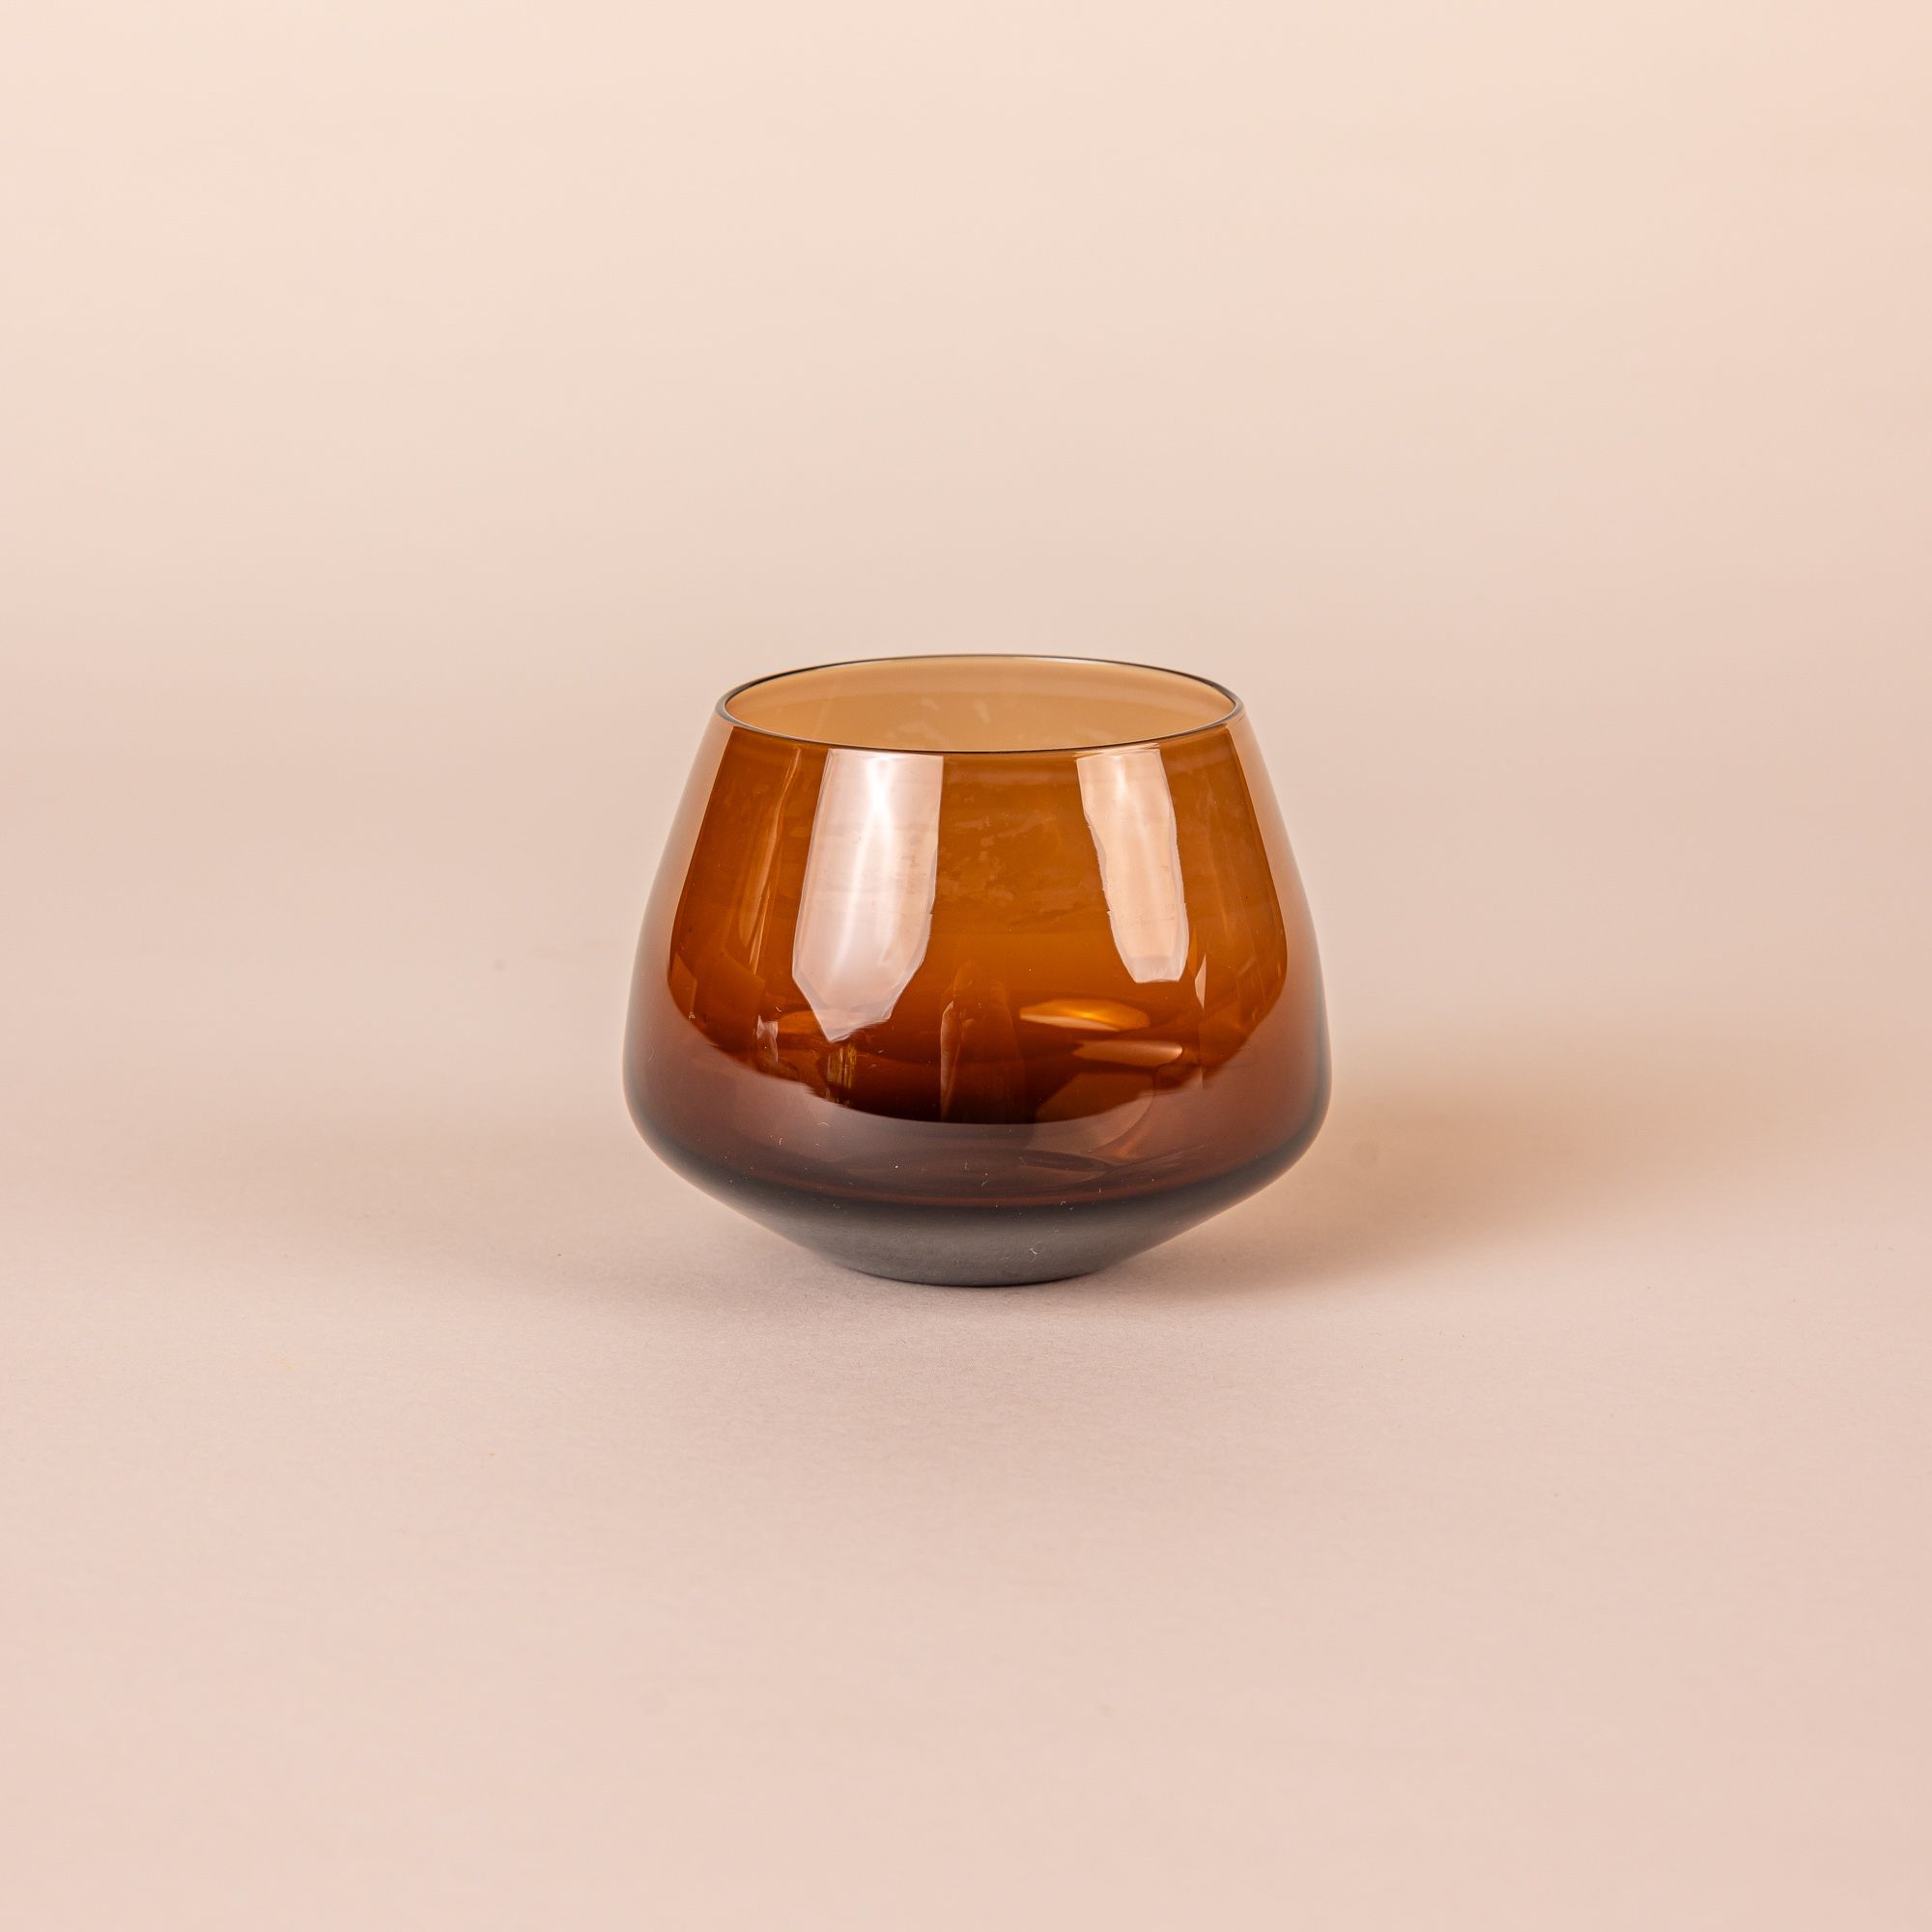 Brown glass whiskey snifter with a rounded base